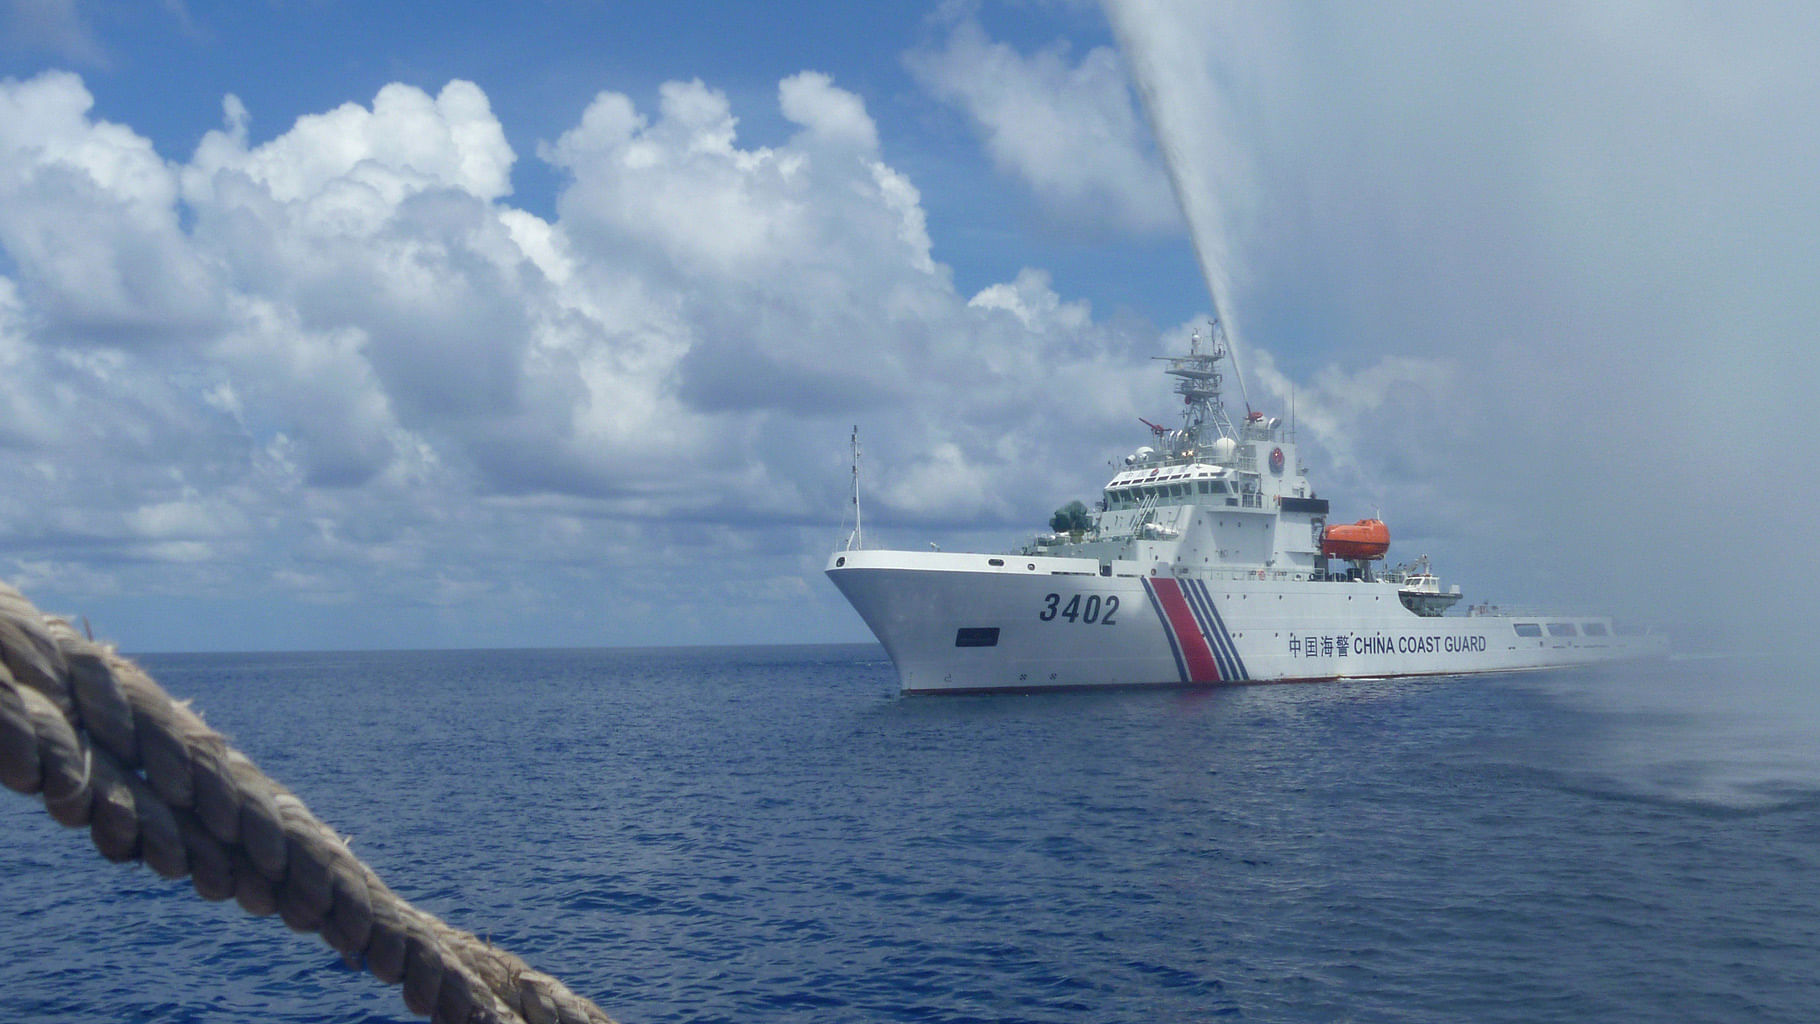 Chinese Coast Guard members approach Filipino fishermen as they confront each other off Scarborough Shoal in the South China Sea. (Photo: AP)